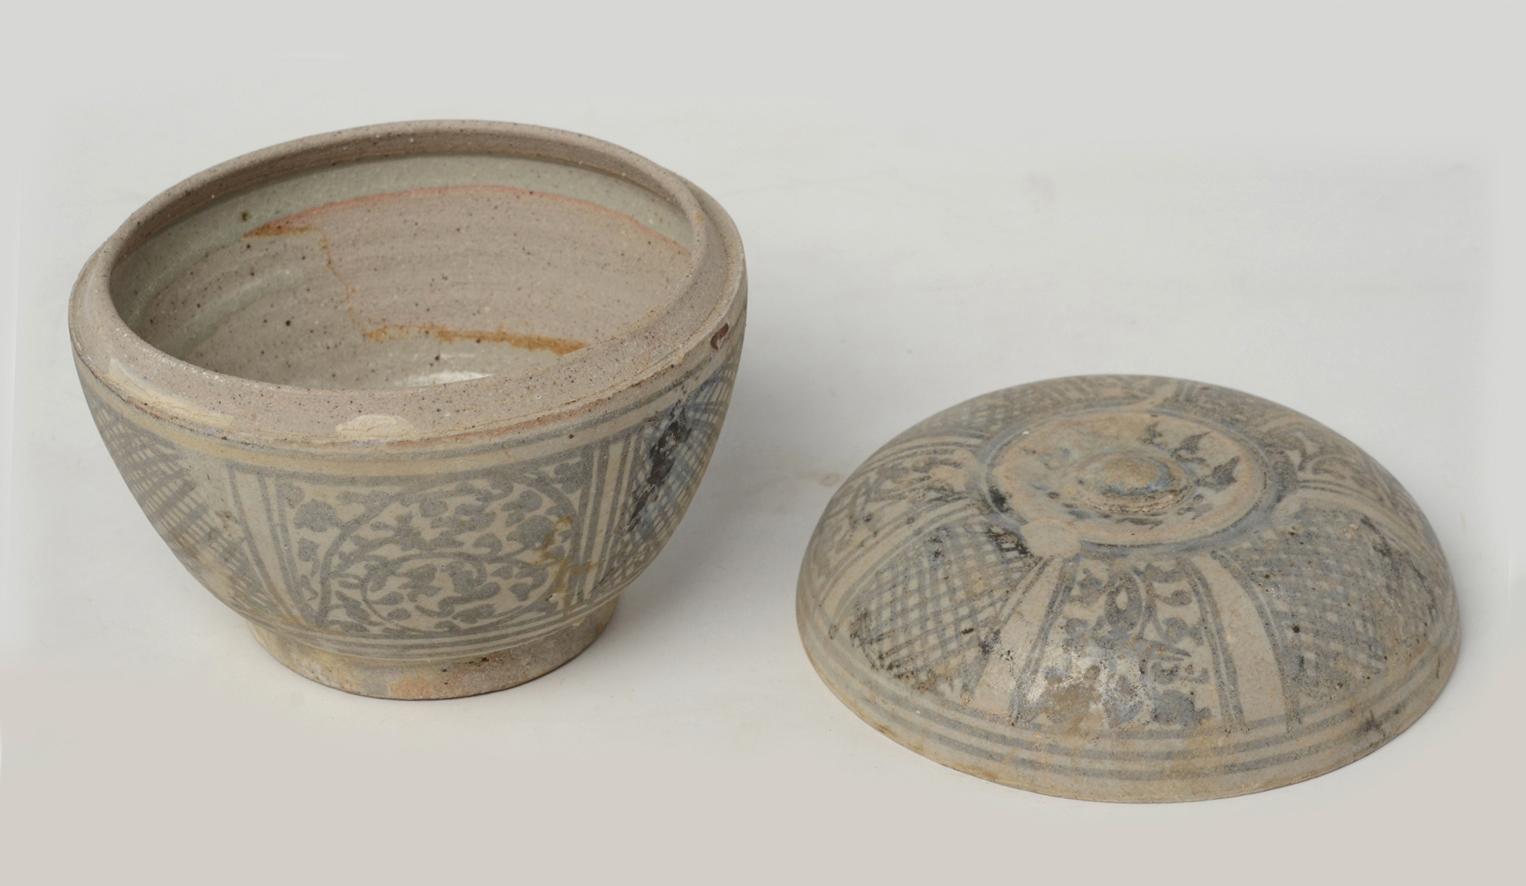 Antique Sukhothai ceramic covered bowl.

Age: Thailand, Sukhothai Period, 14th - 16th Century
Size: Height 10 C.M. / Width 12 C.M.
Condition: Nice glaze and condition overall, a tiny chip on mouthrim (photo # 4).

100% Satisfaction and Authenticity